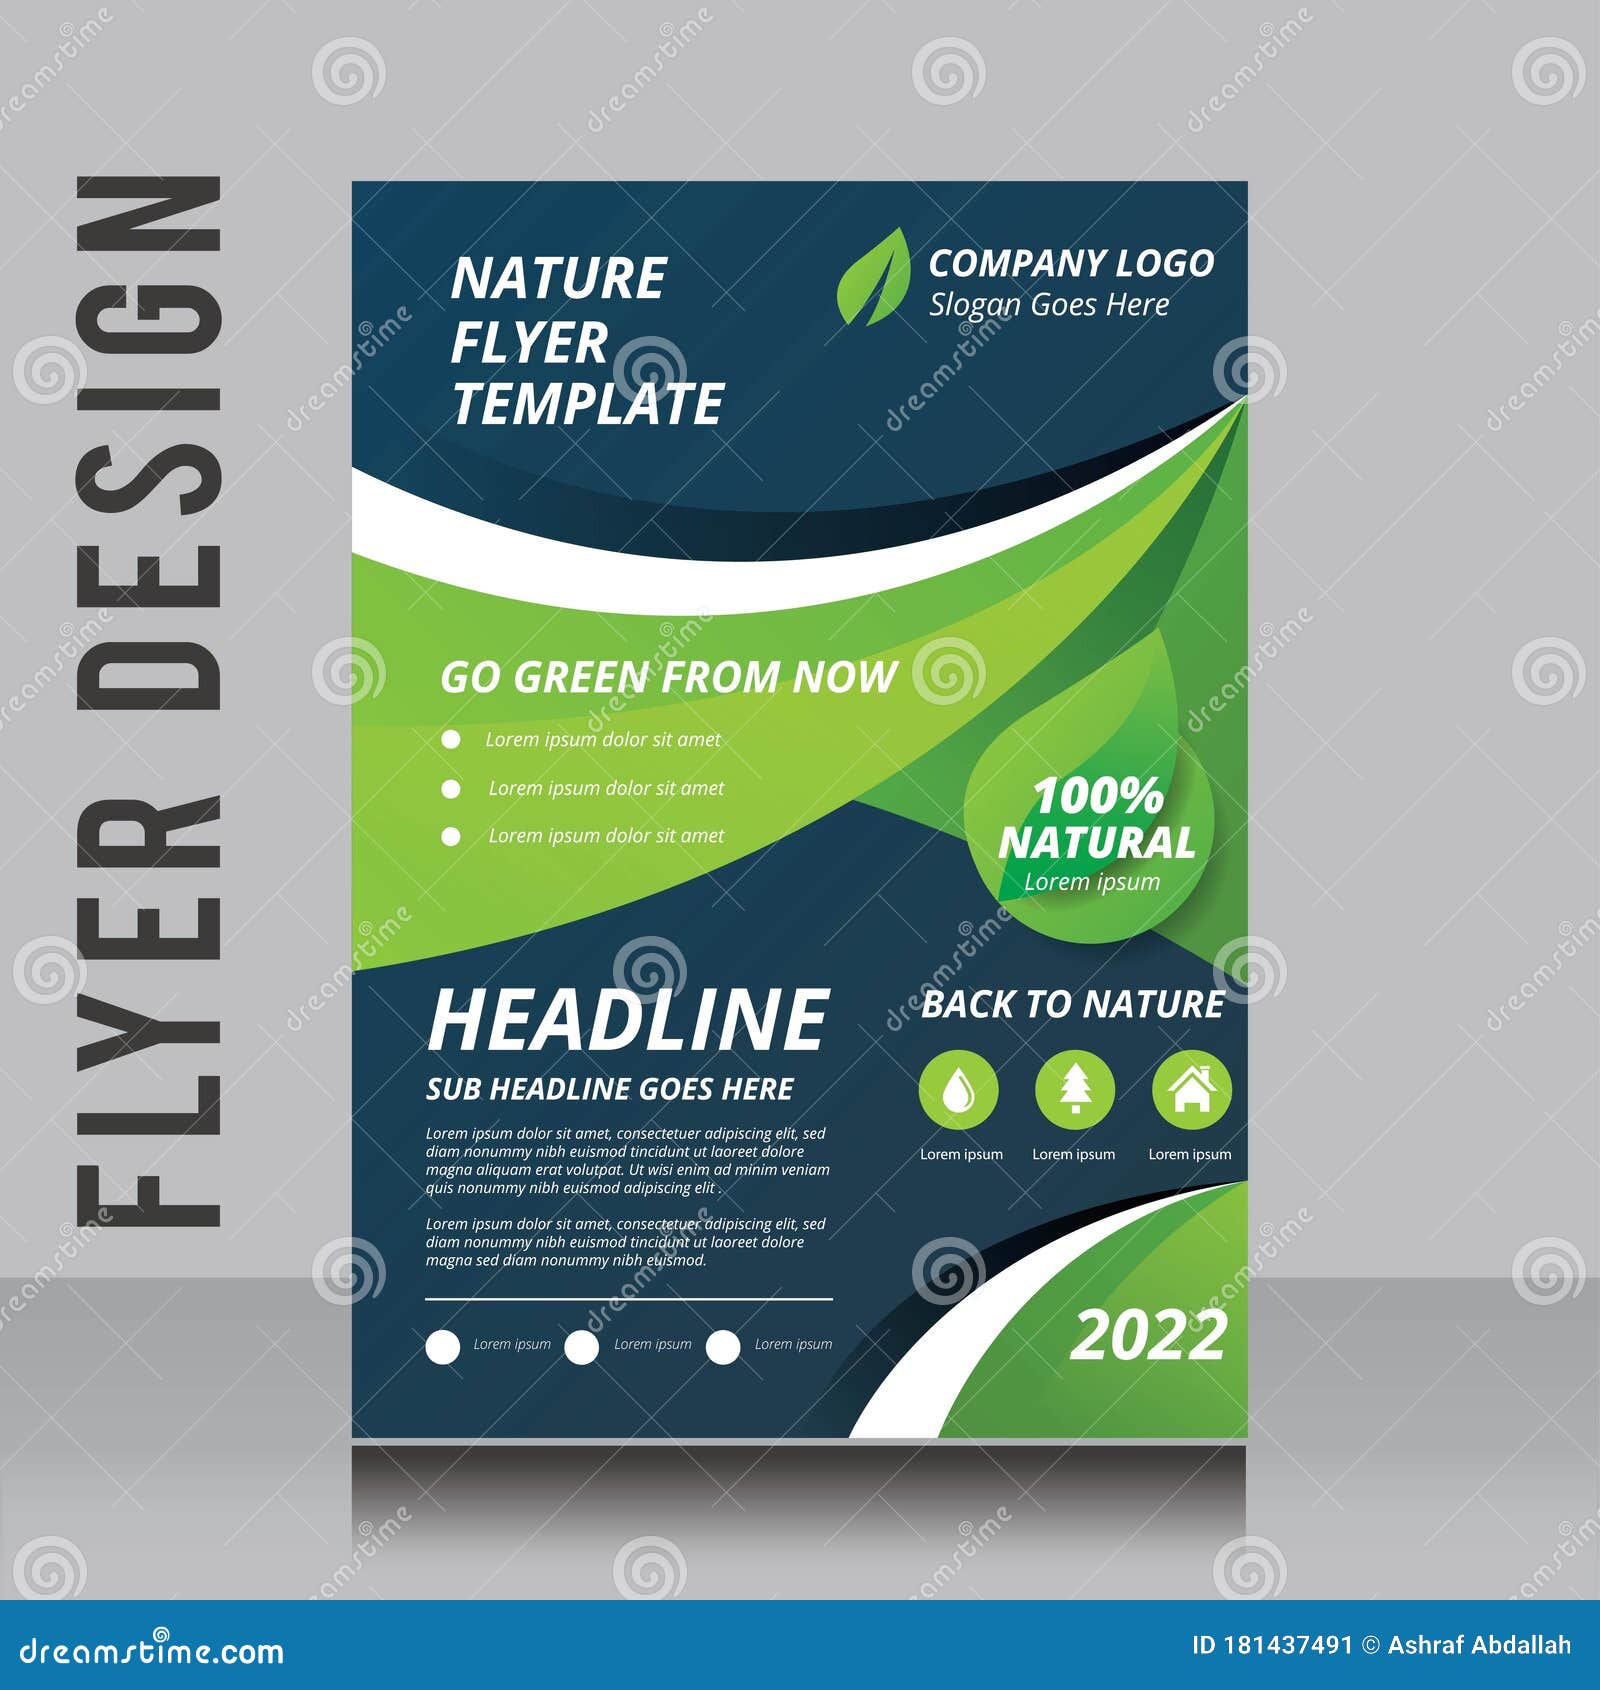 Creative Nature Business Brochure Flyer Design With Vibrant Colors Template Design Illustration Stock Vector Illustration Of Identity Corporate